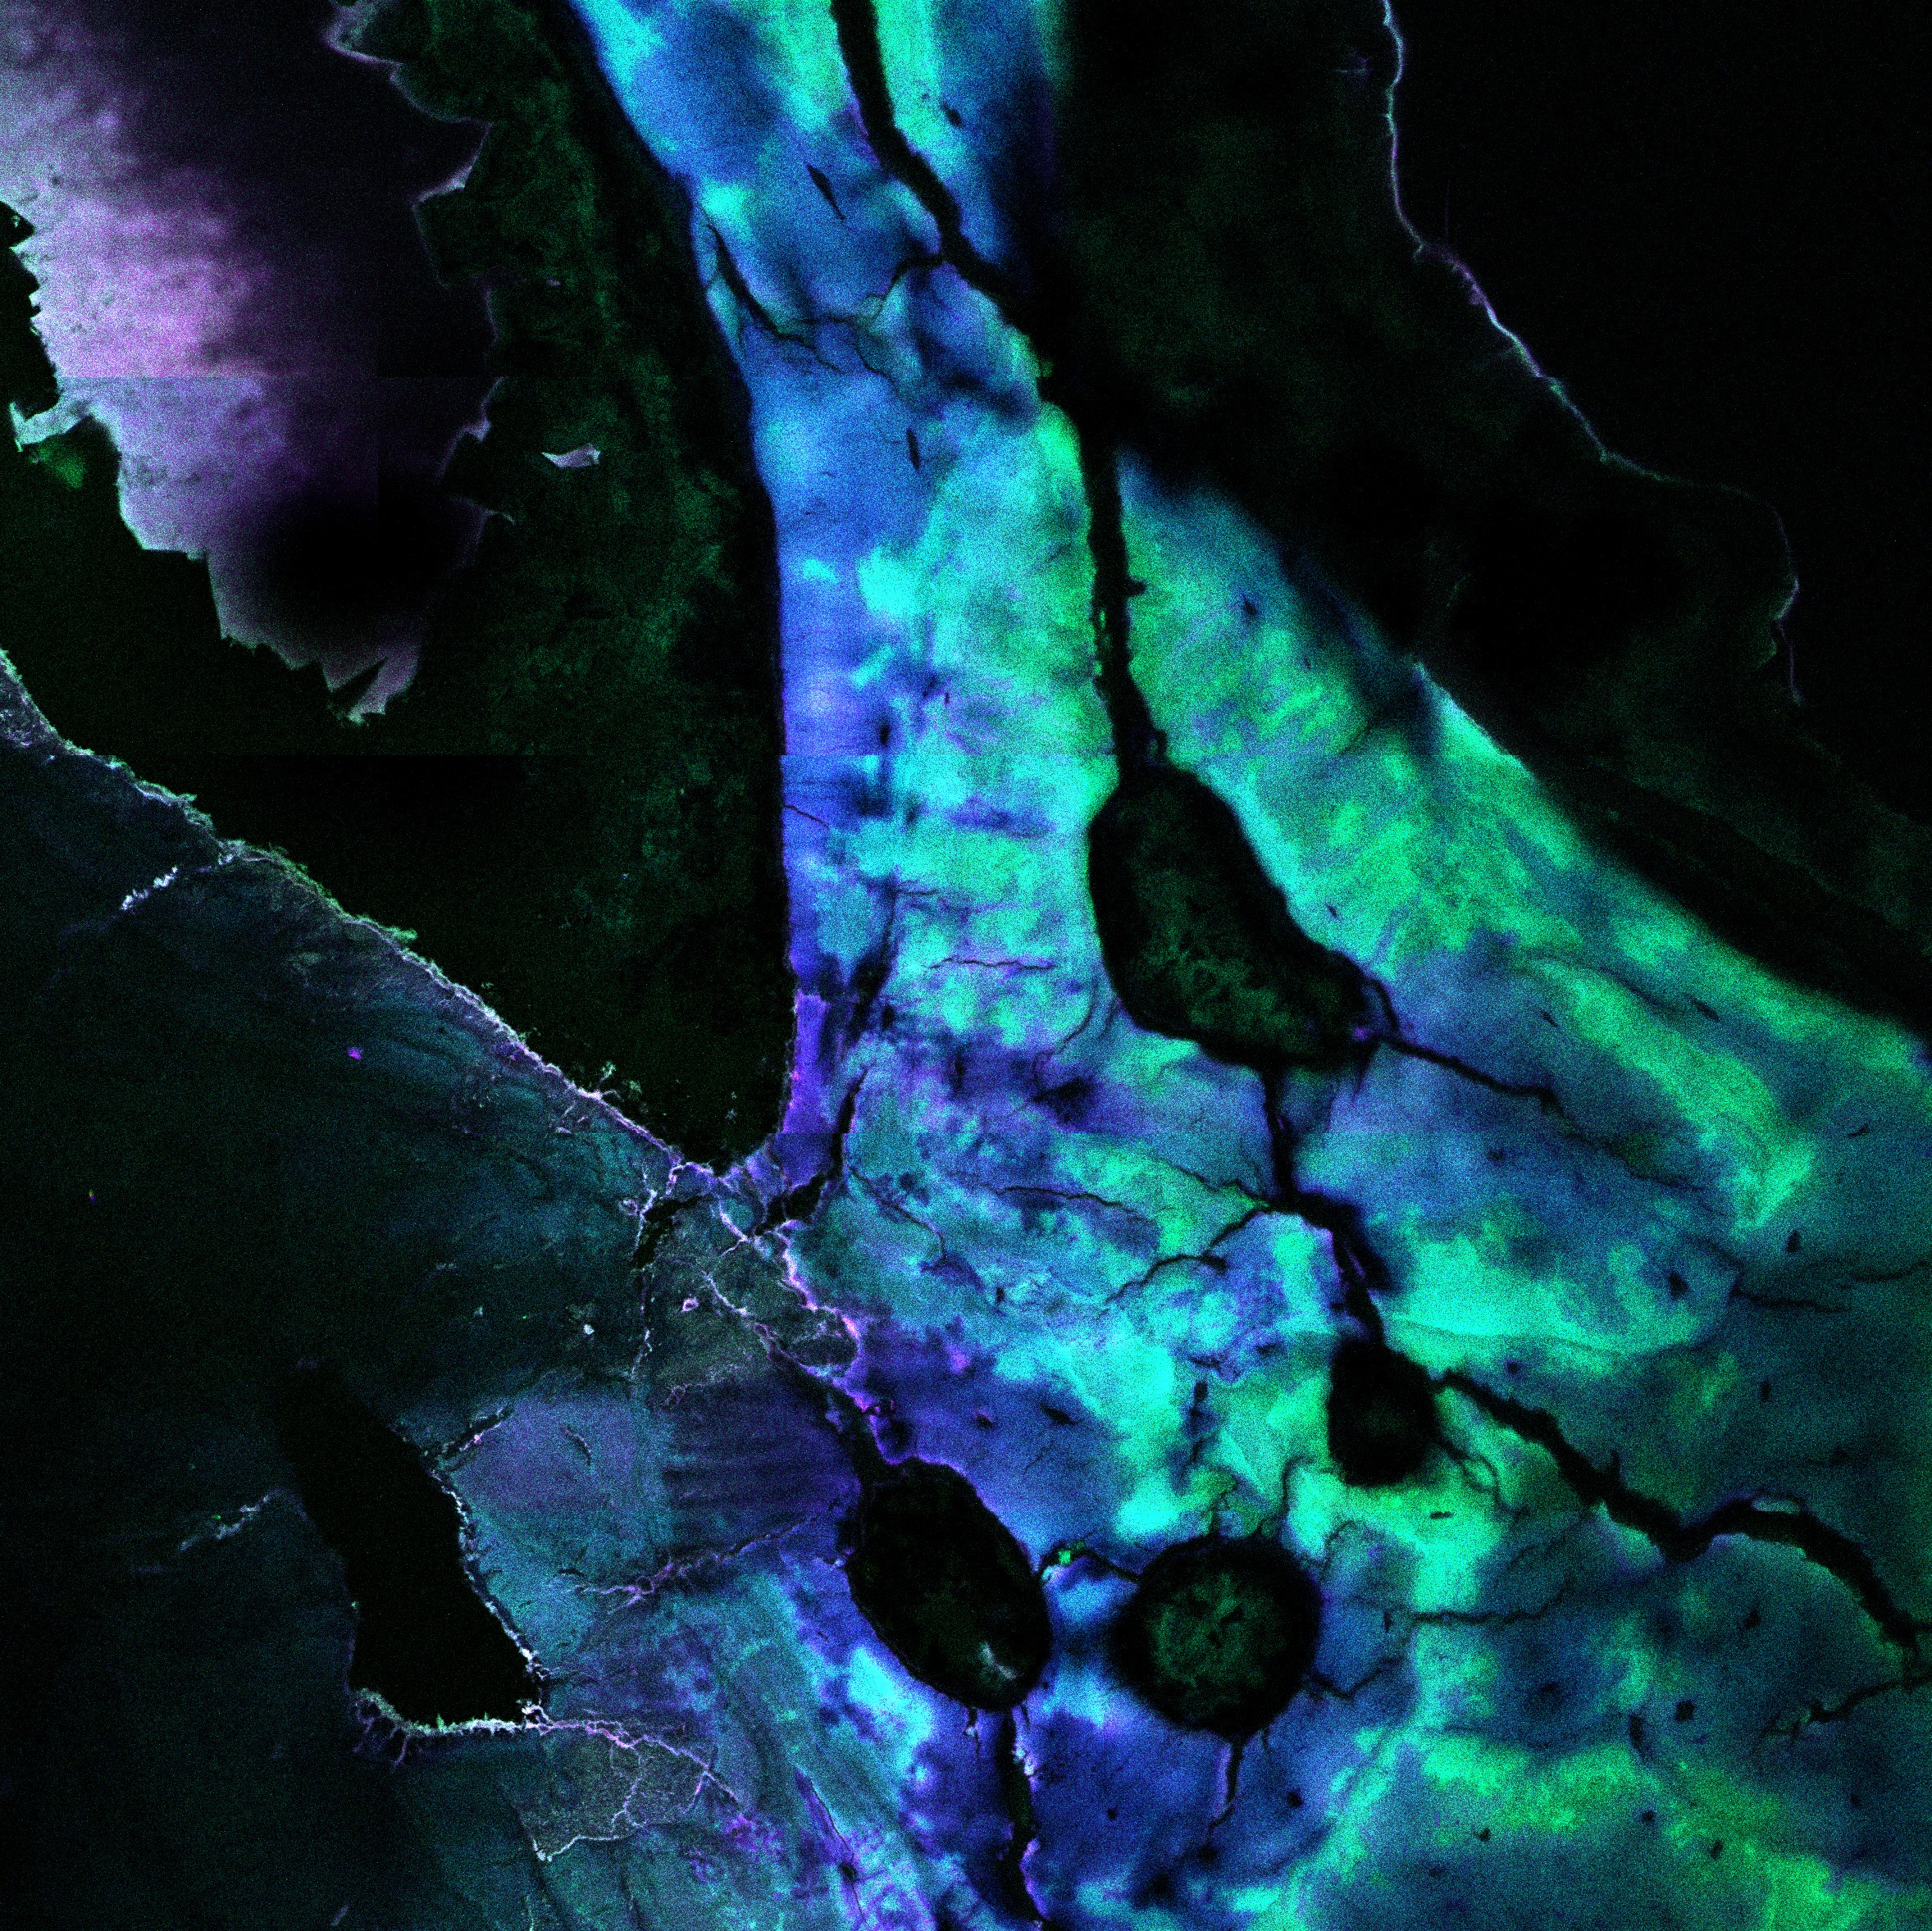 A close-up image of human rib bone at high magnification using a laser scanning confocal microscope. The image is mostly blue/purple due to the use of a stain. There is a turquoise colouration which is the diagenetic (postmortem) changes to the bone over time.